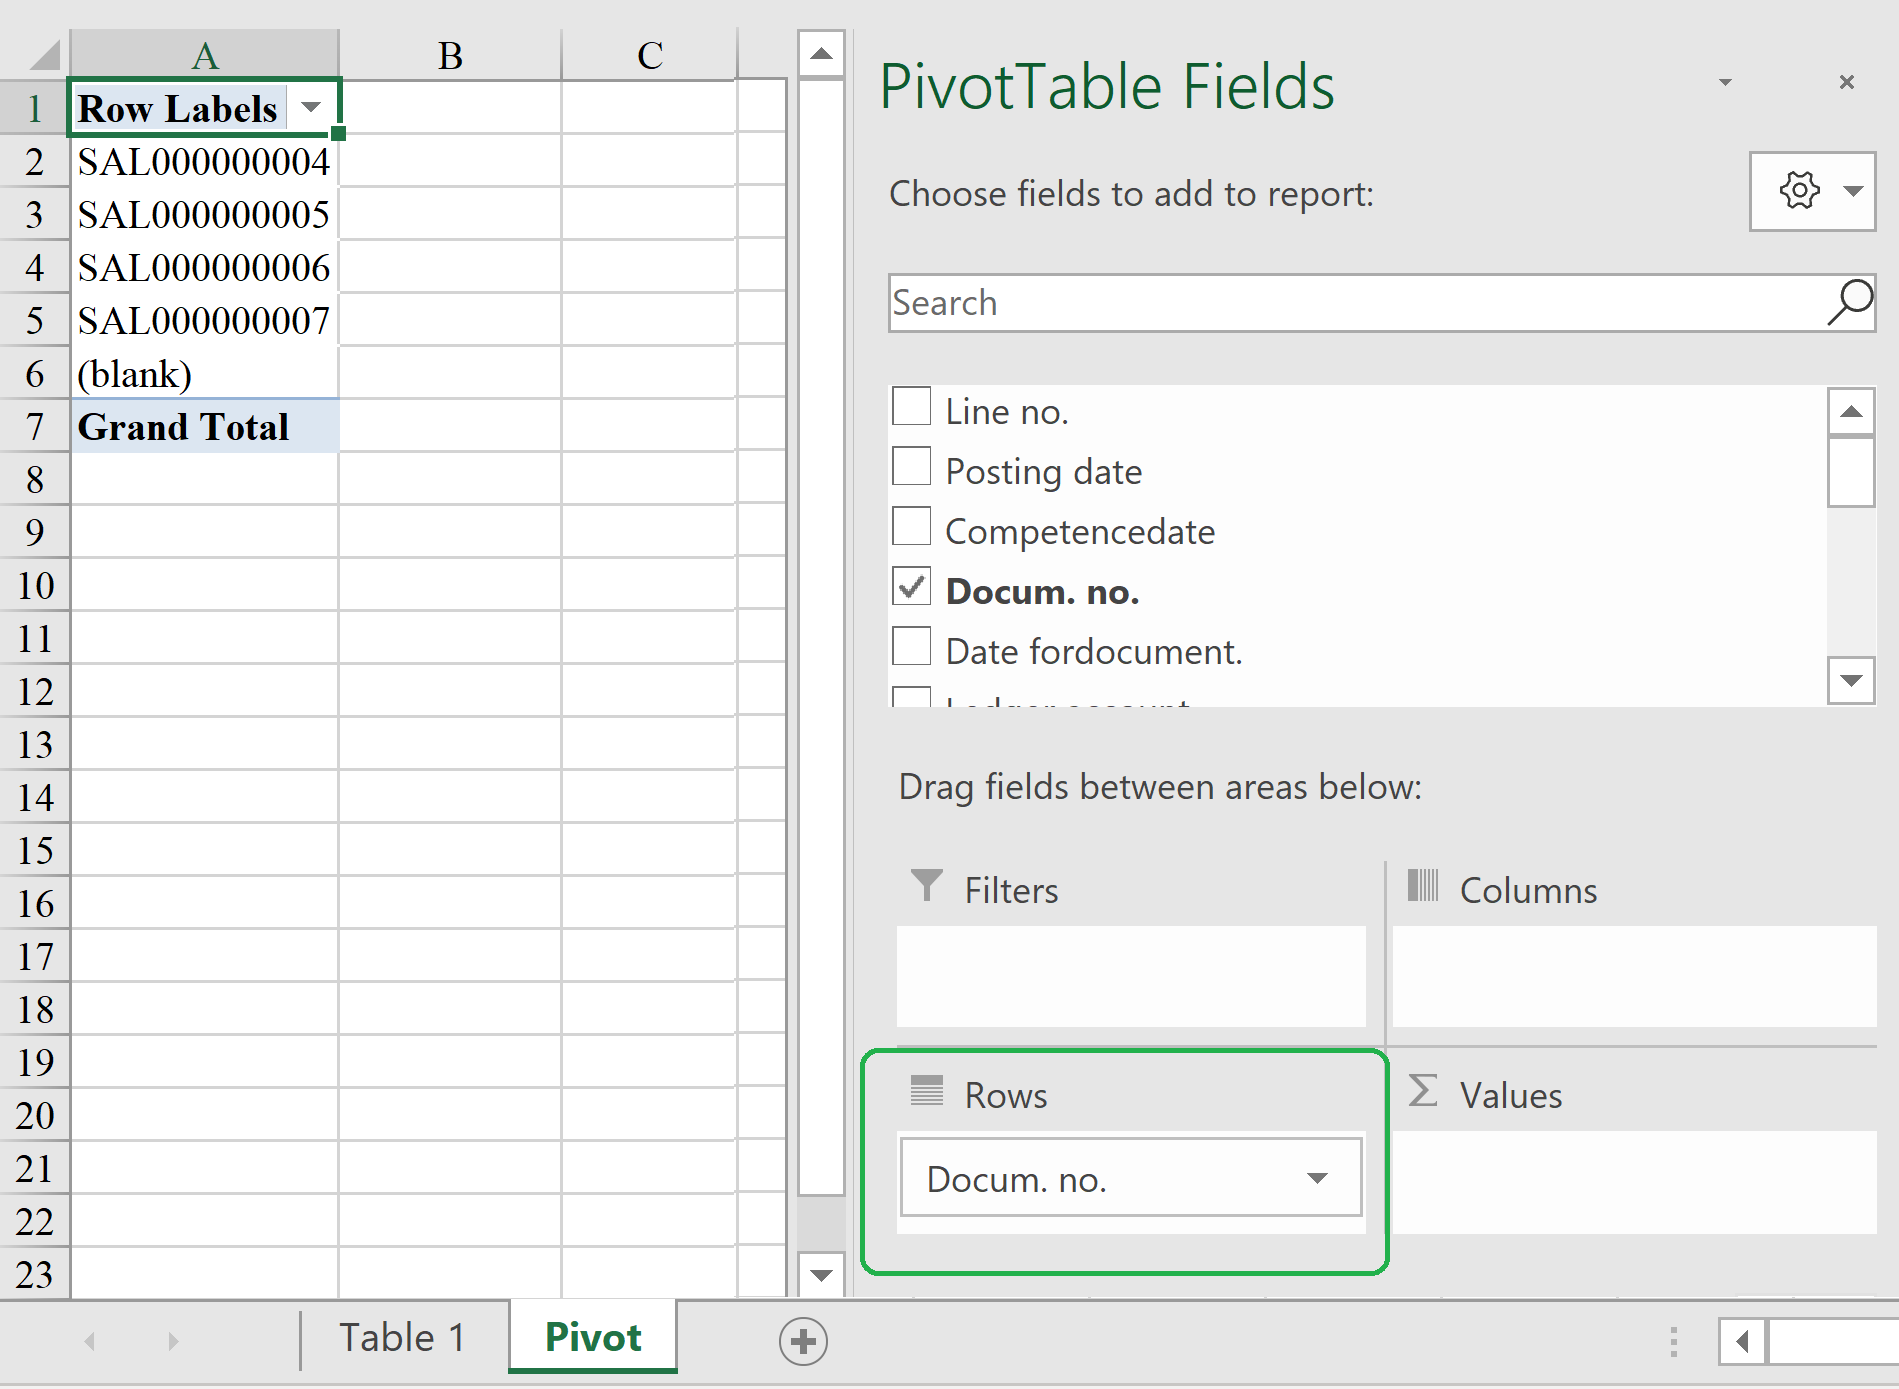 Example of an Excel PivotTable where Docum. No. is selected in the Rows field.